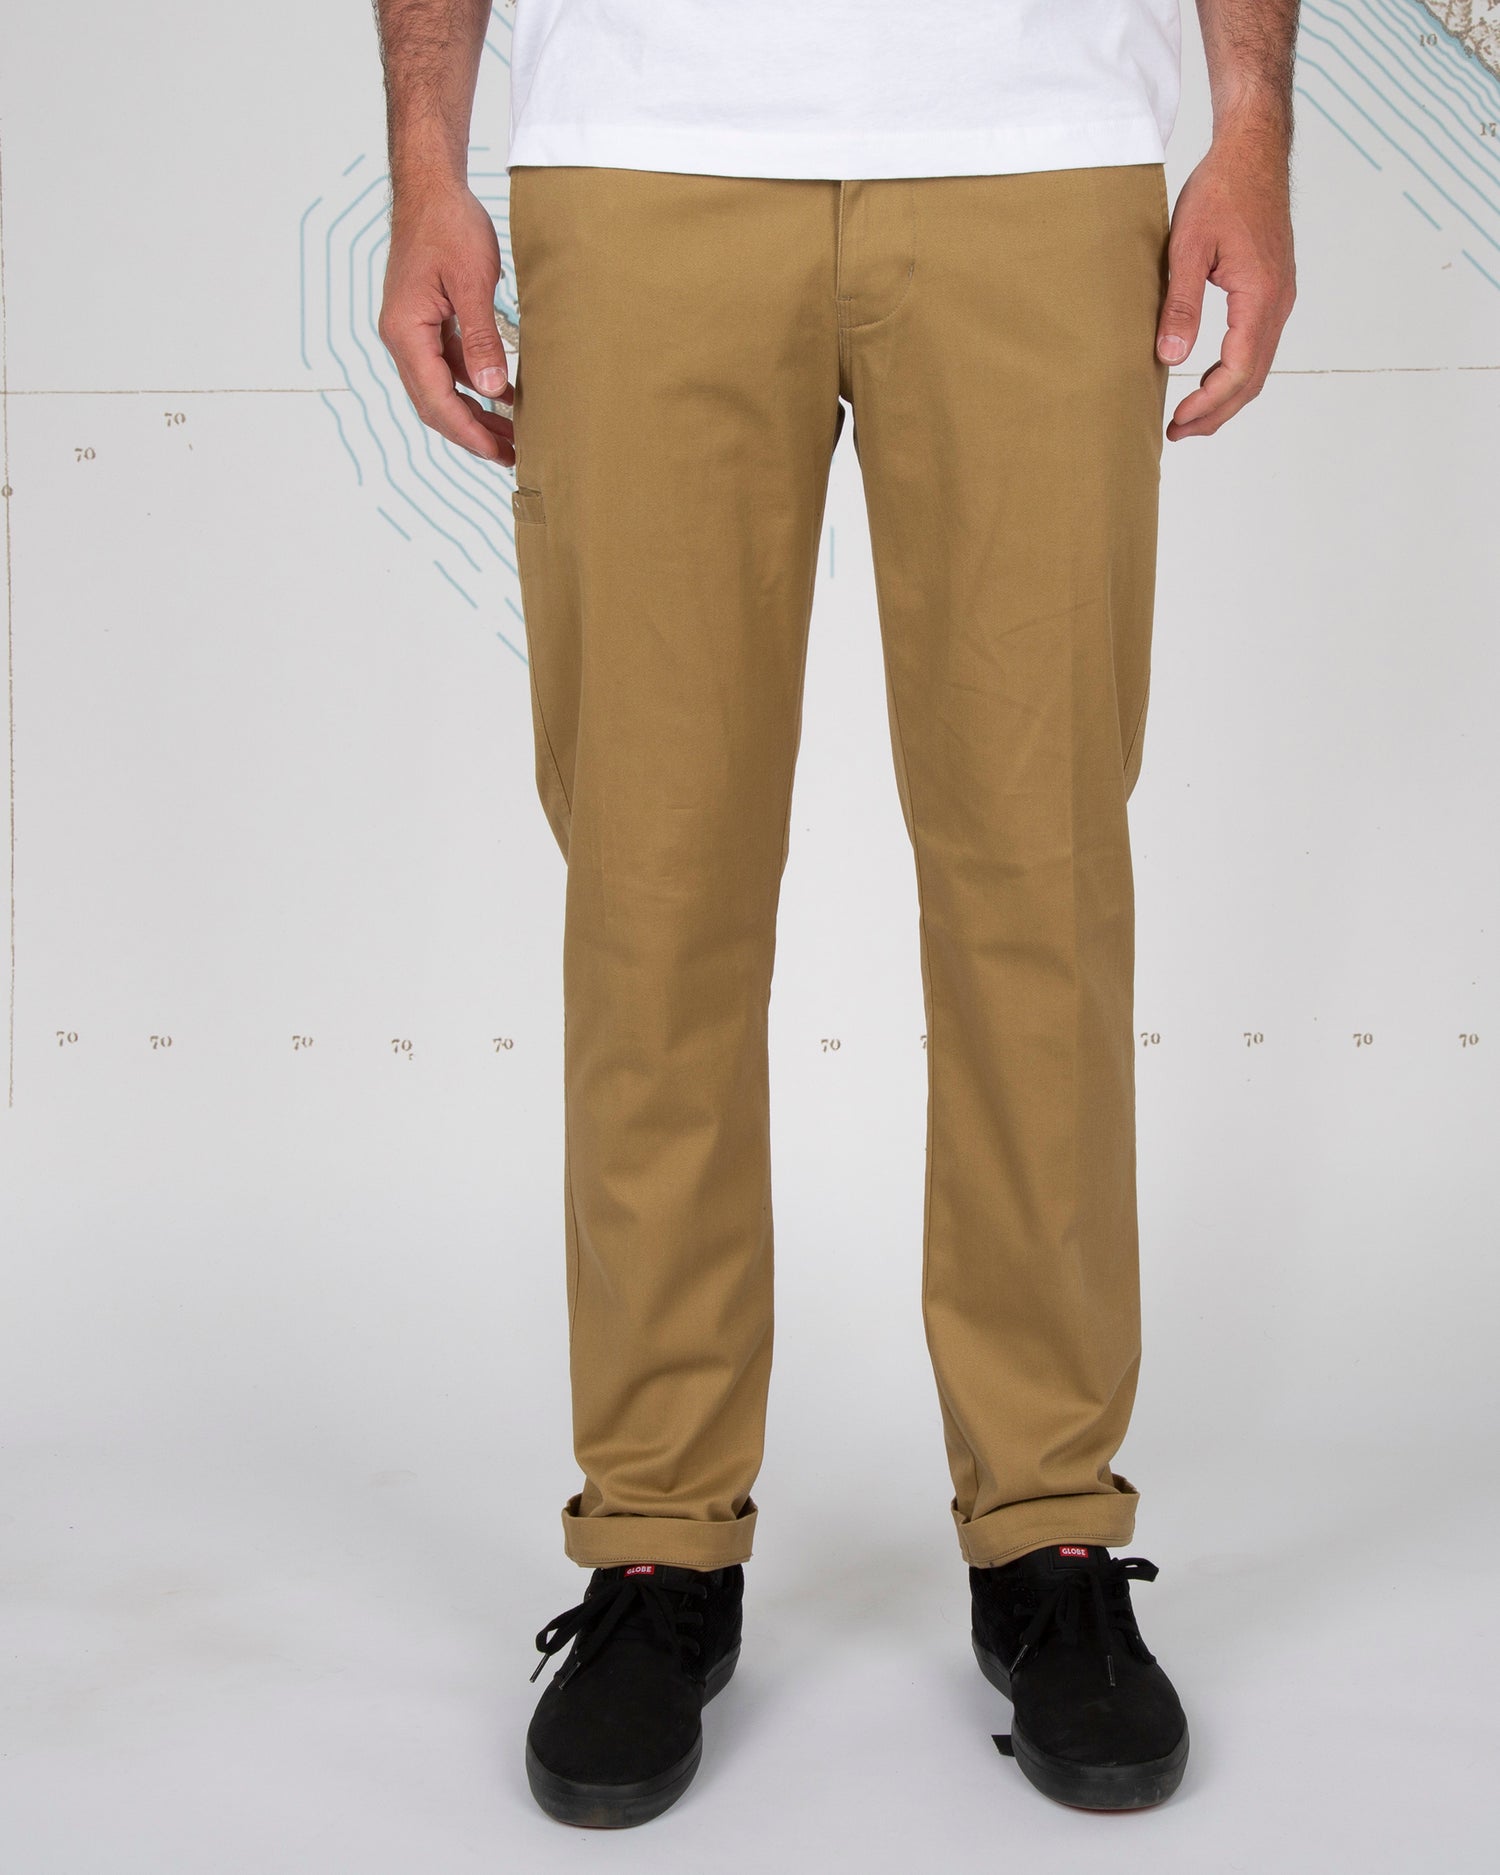 On body front of Deckhand Workwear Brown Chino Pant